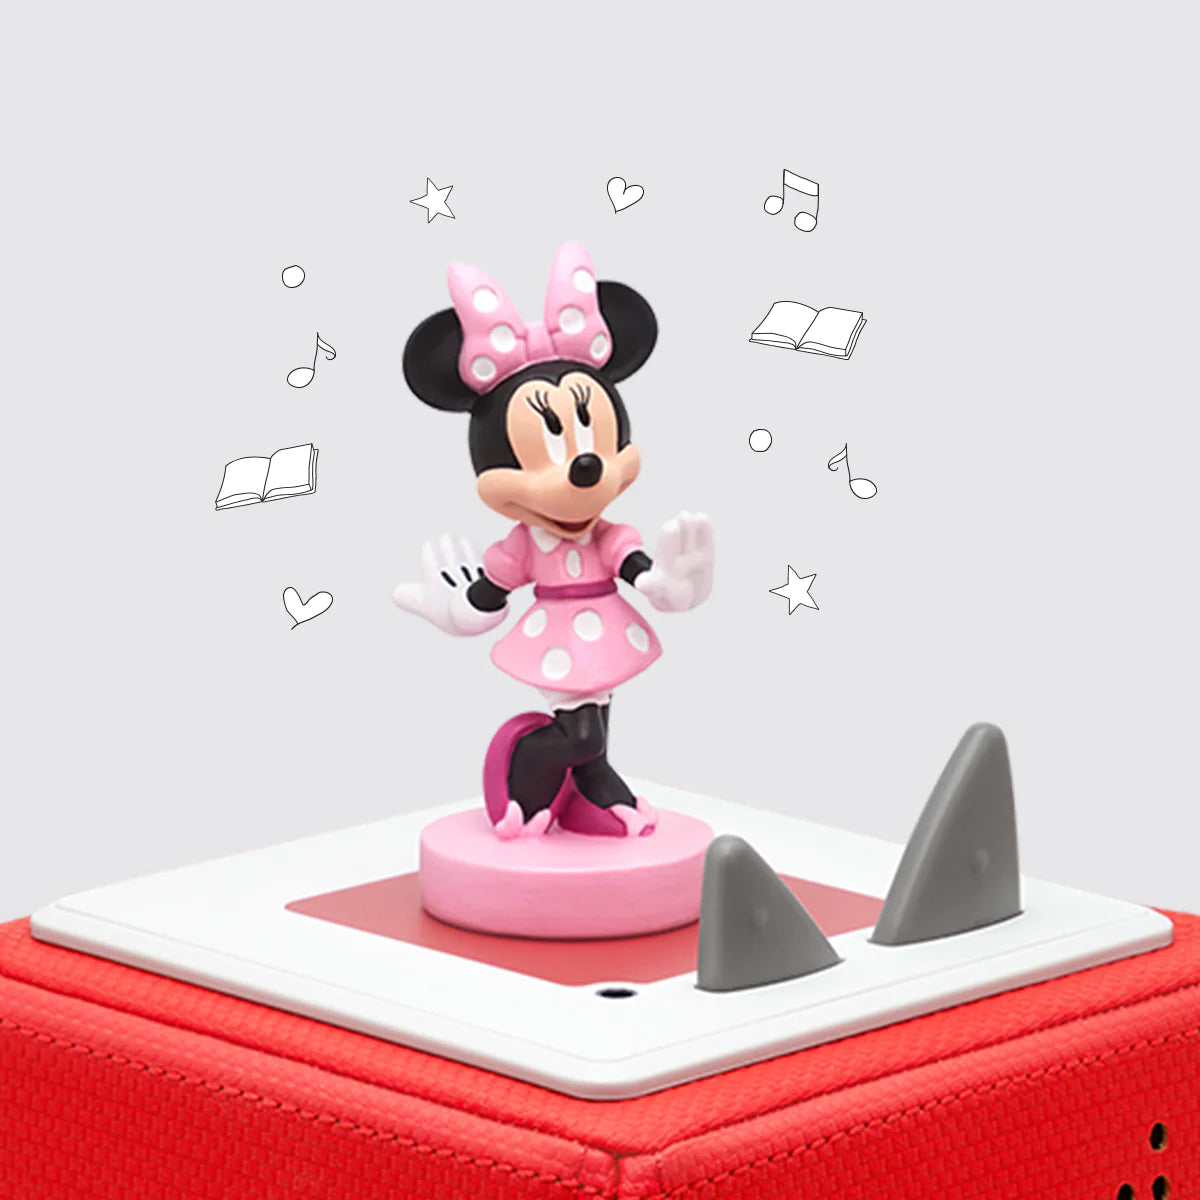 Disney: Minnie Mouse by Tonies #10000655